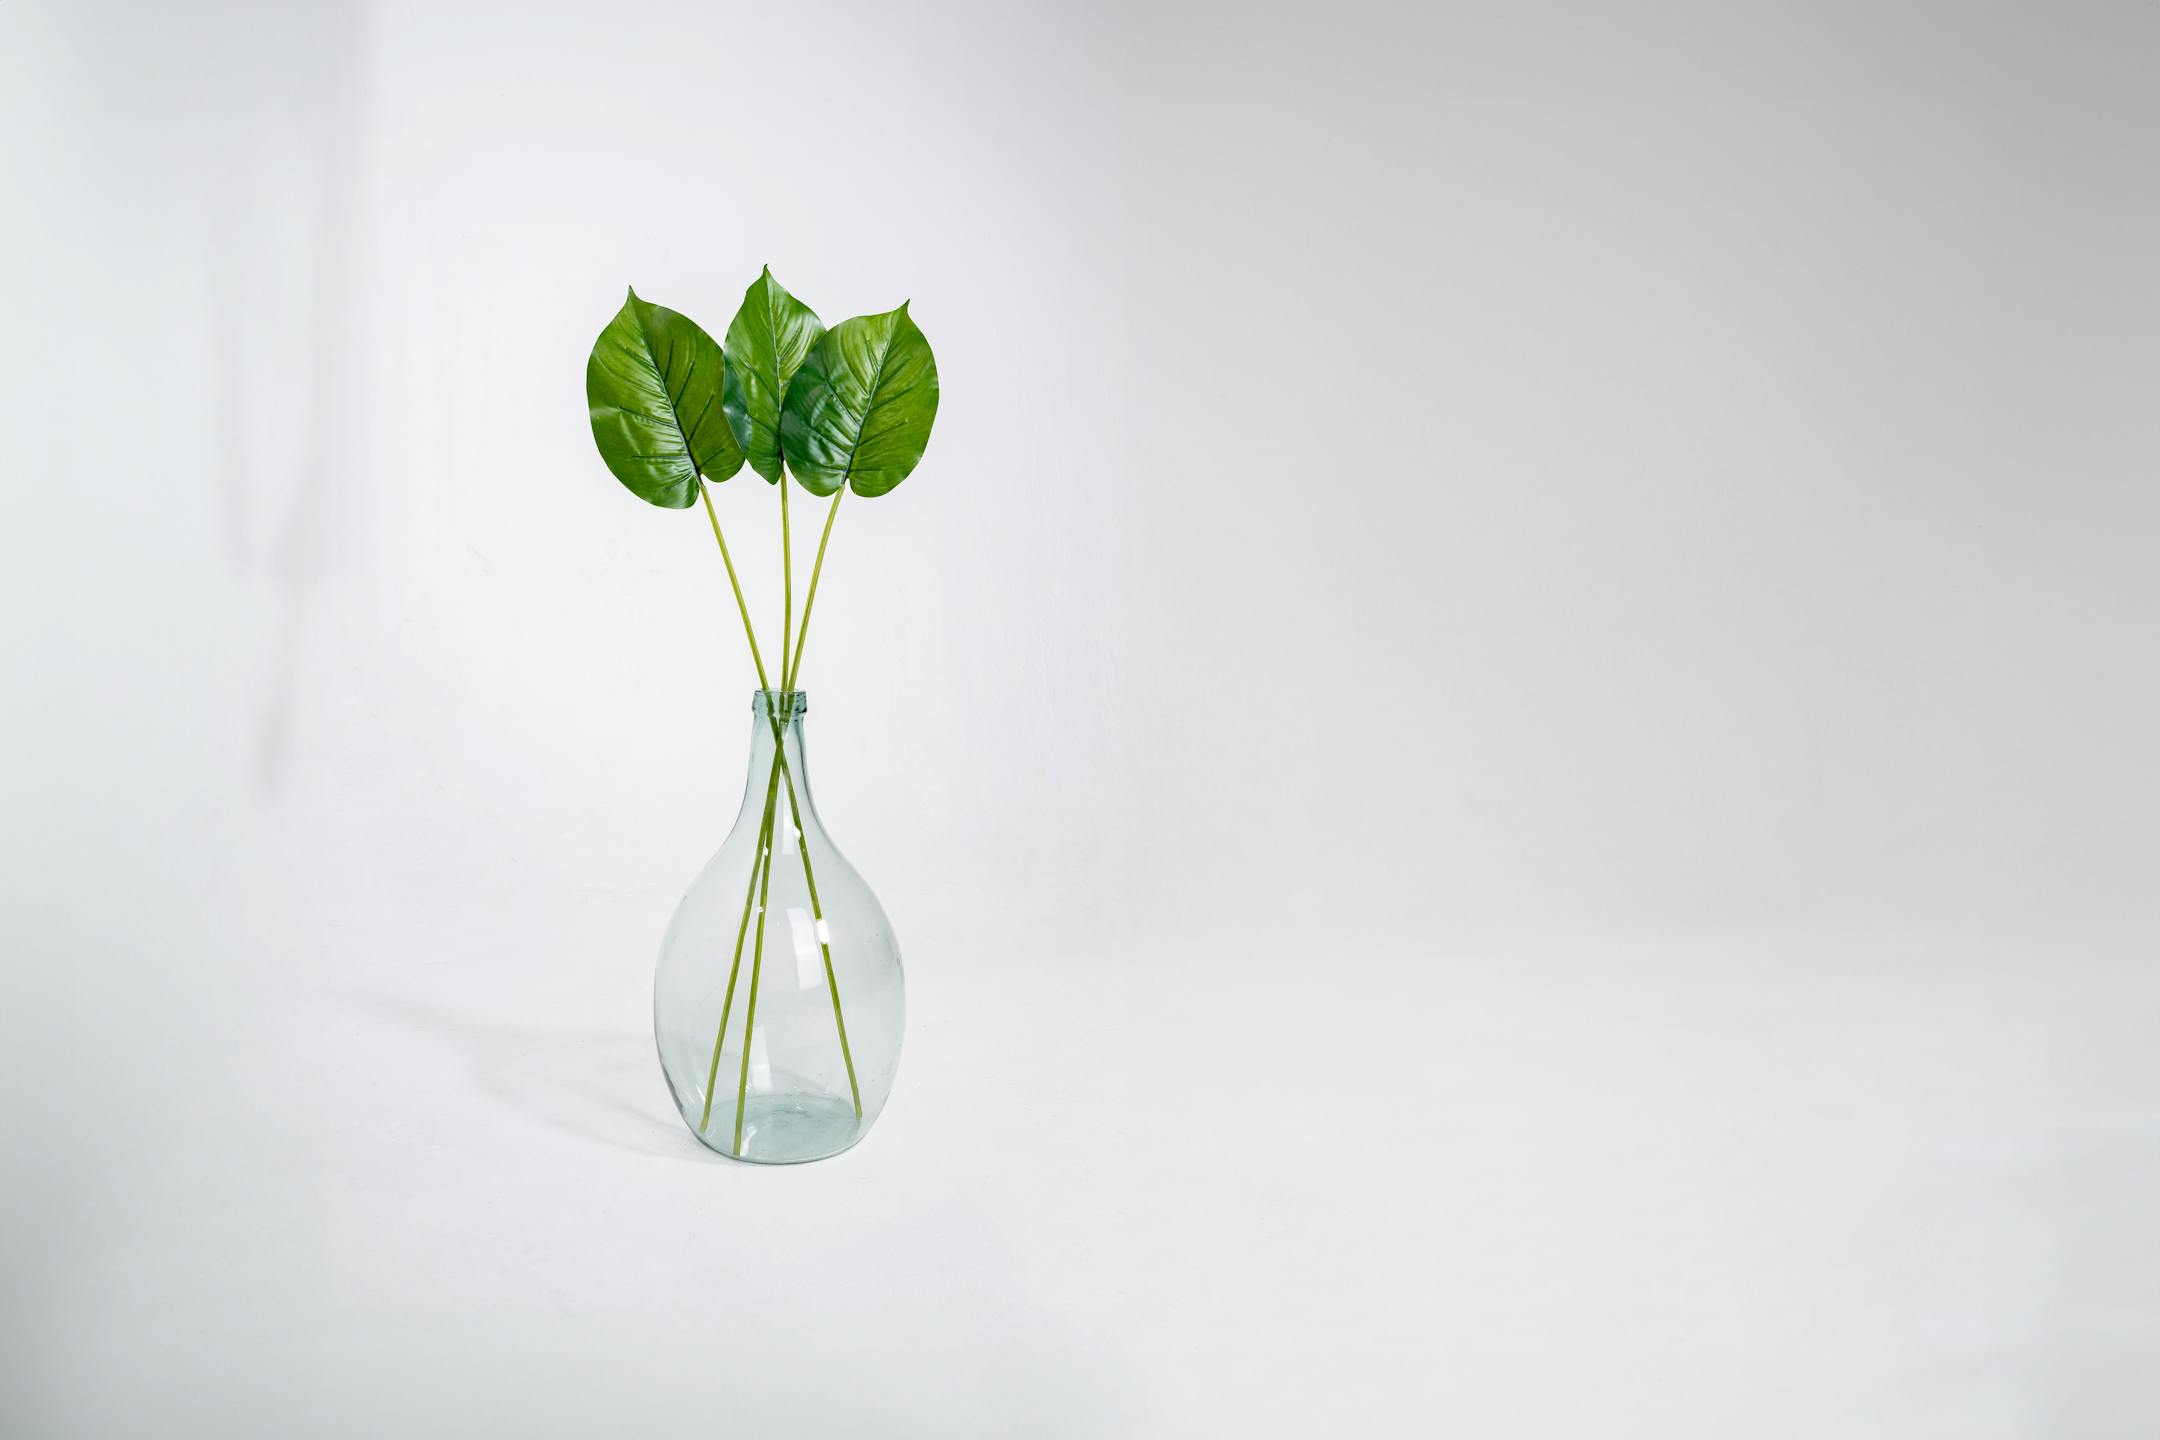 Three artificial pothos leaves in glass vase